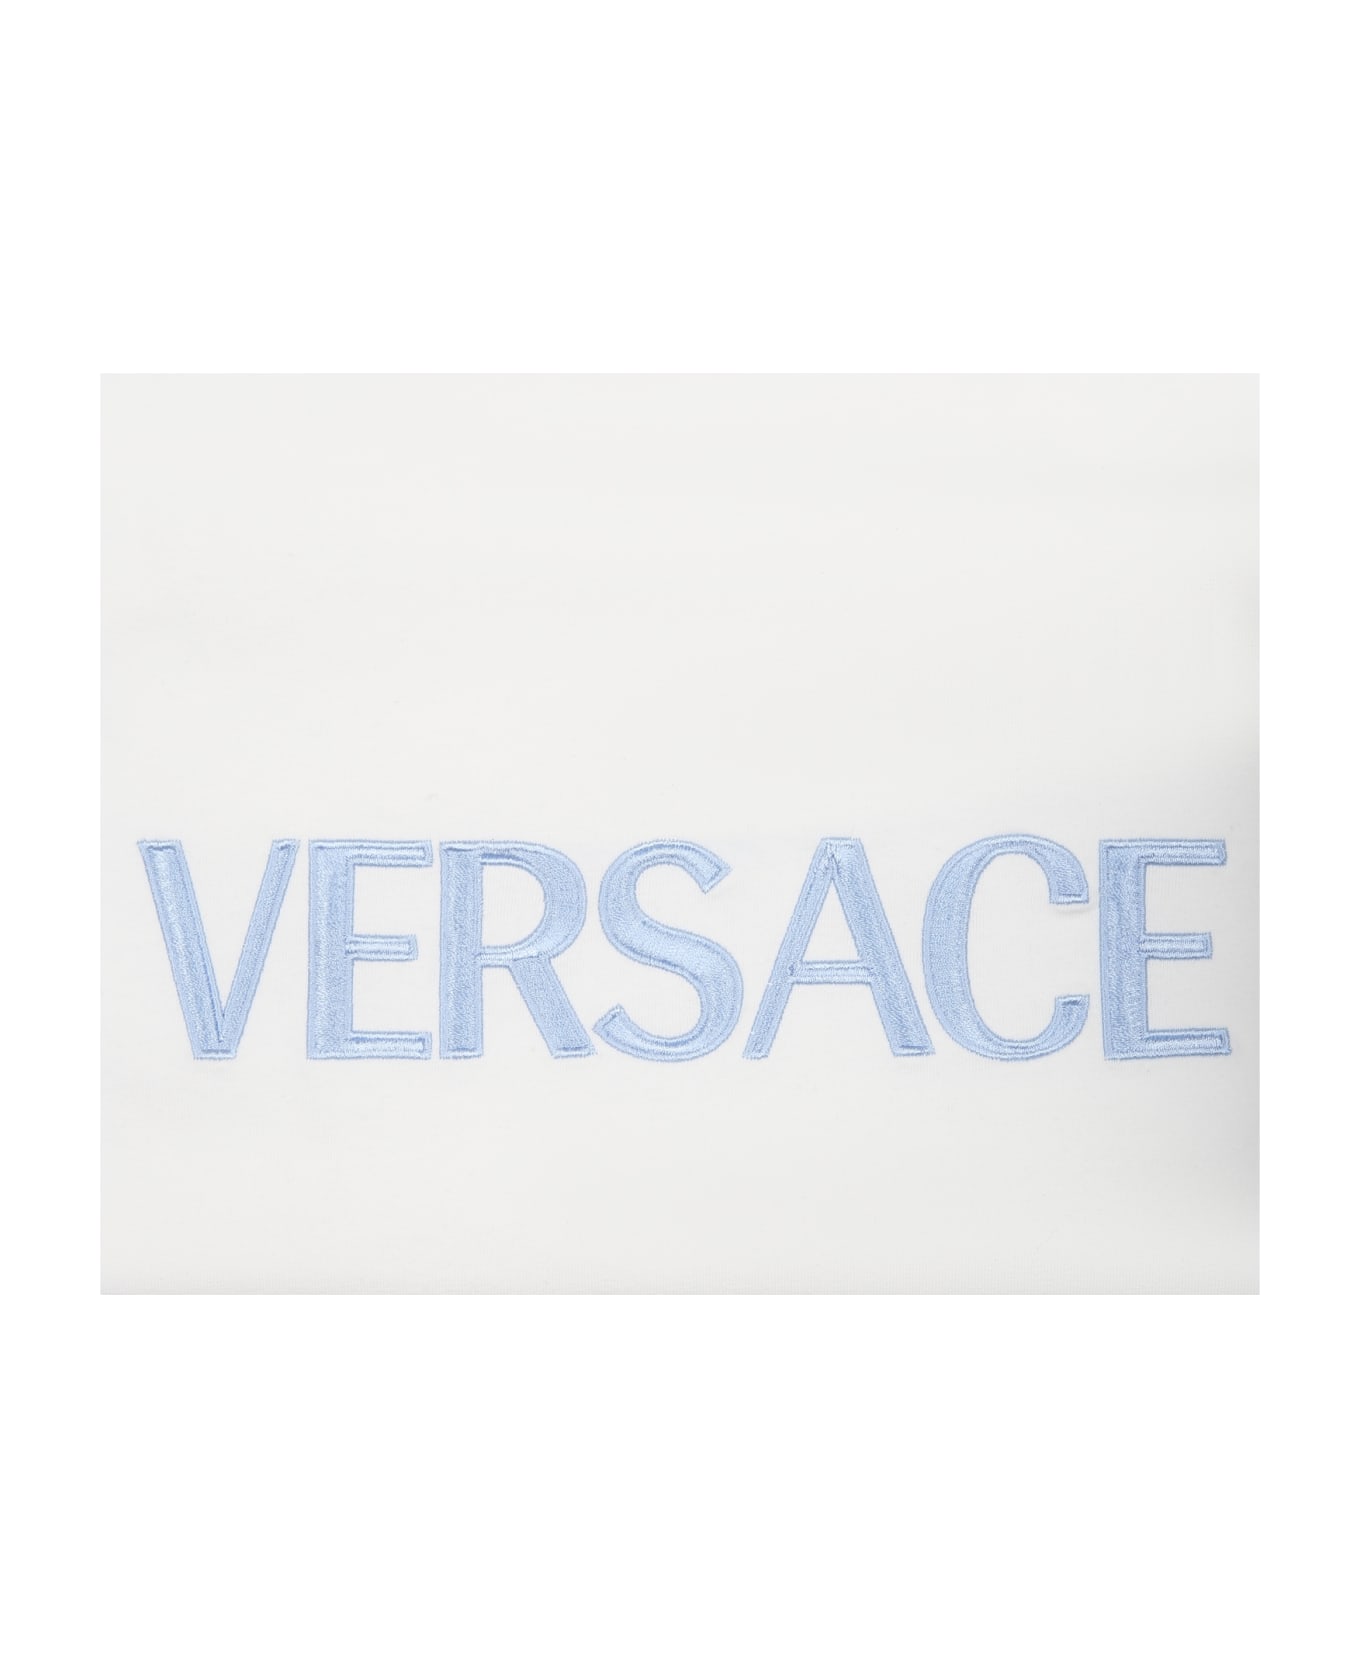 Versace Light Blue Blanket For Baby Boy With Baroque Print - Light Blue アクセサリー＆ギフト